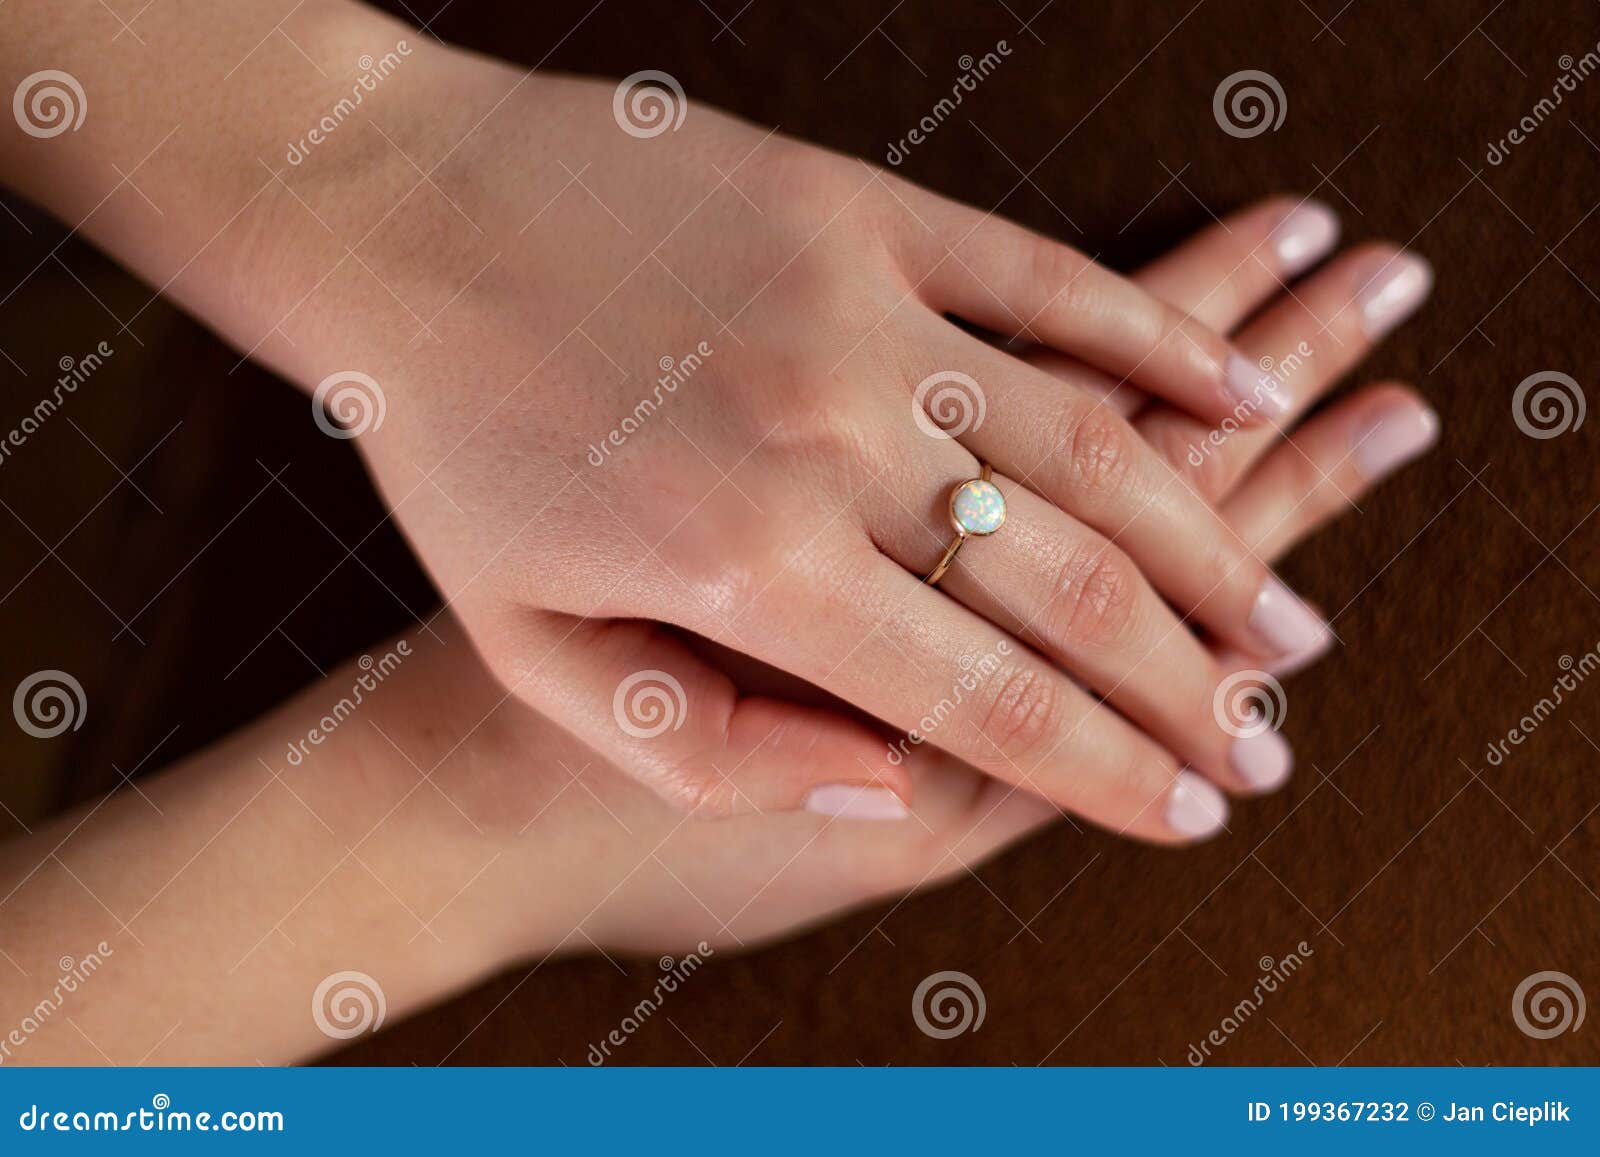 Hand, Fingers, of a Young Woman Wearing a Ring in the Middle Finger, Nail  Polish and Bangles. Stock Image - Image of young, ring: 171414423